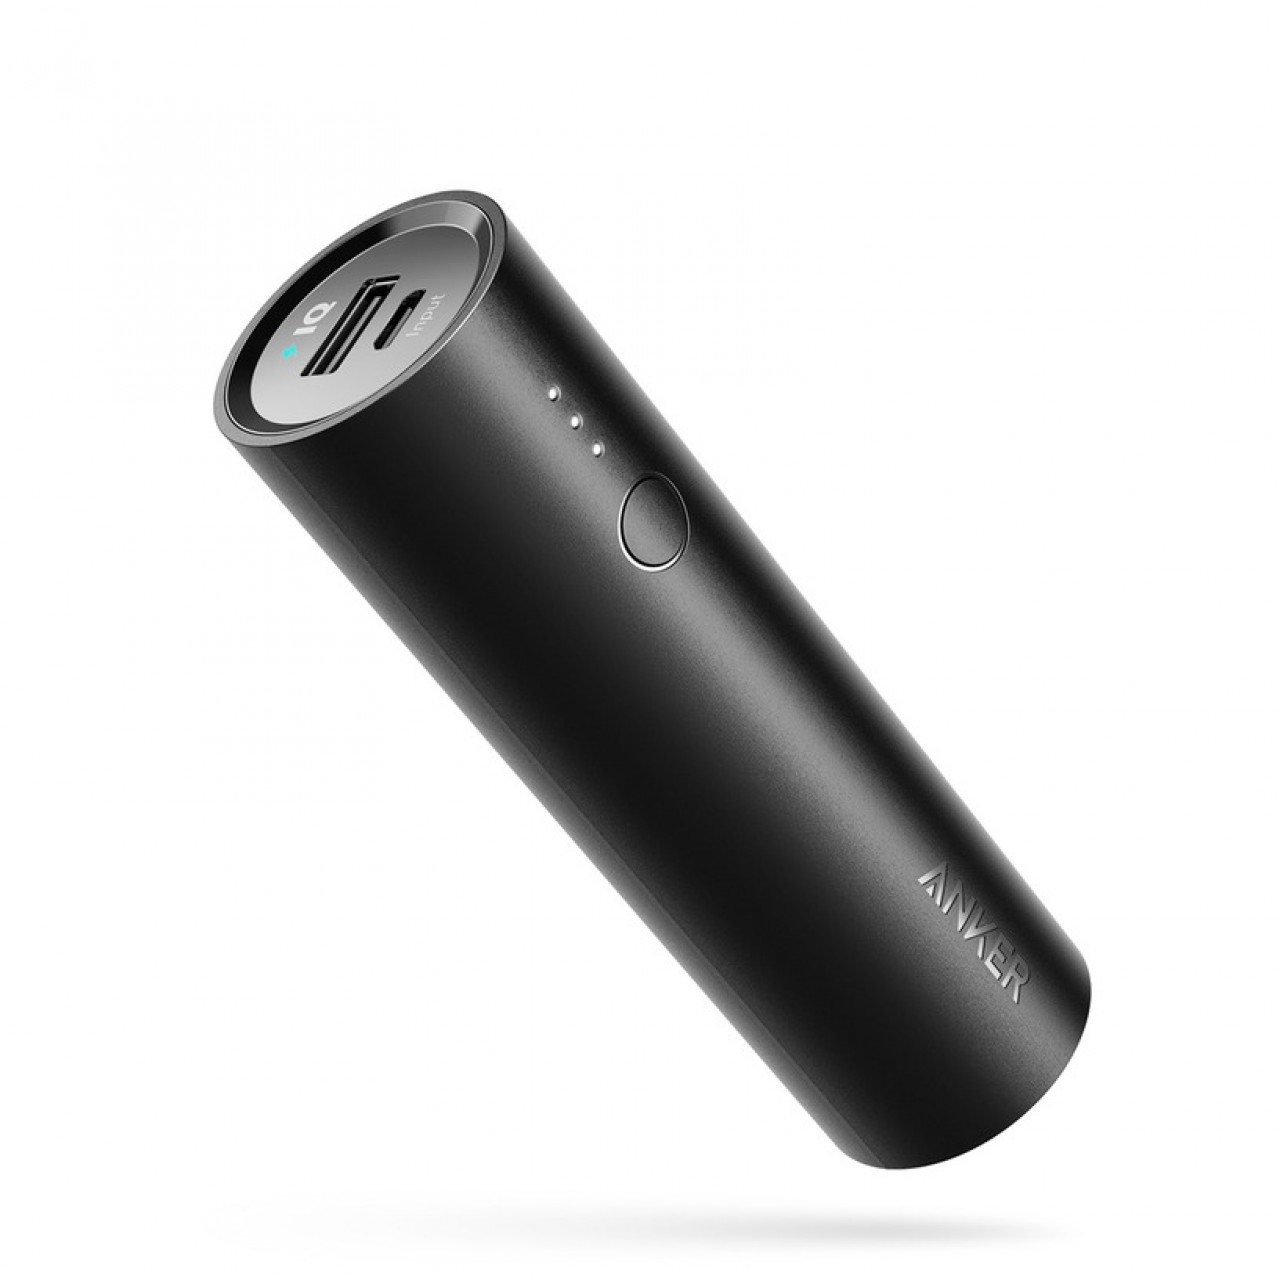 Anker Portable Power Bank 5000 mAh - The Ultra Compact Portable Charger Core